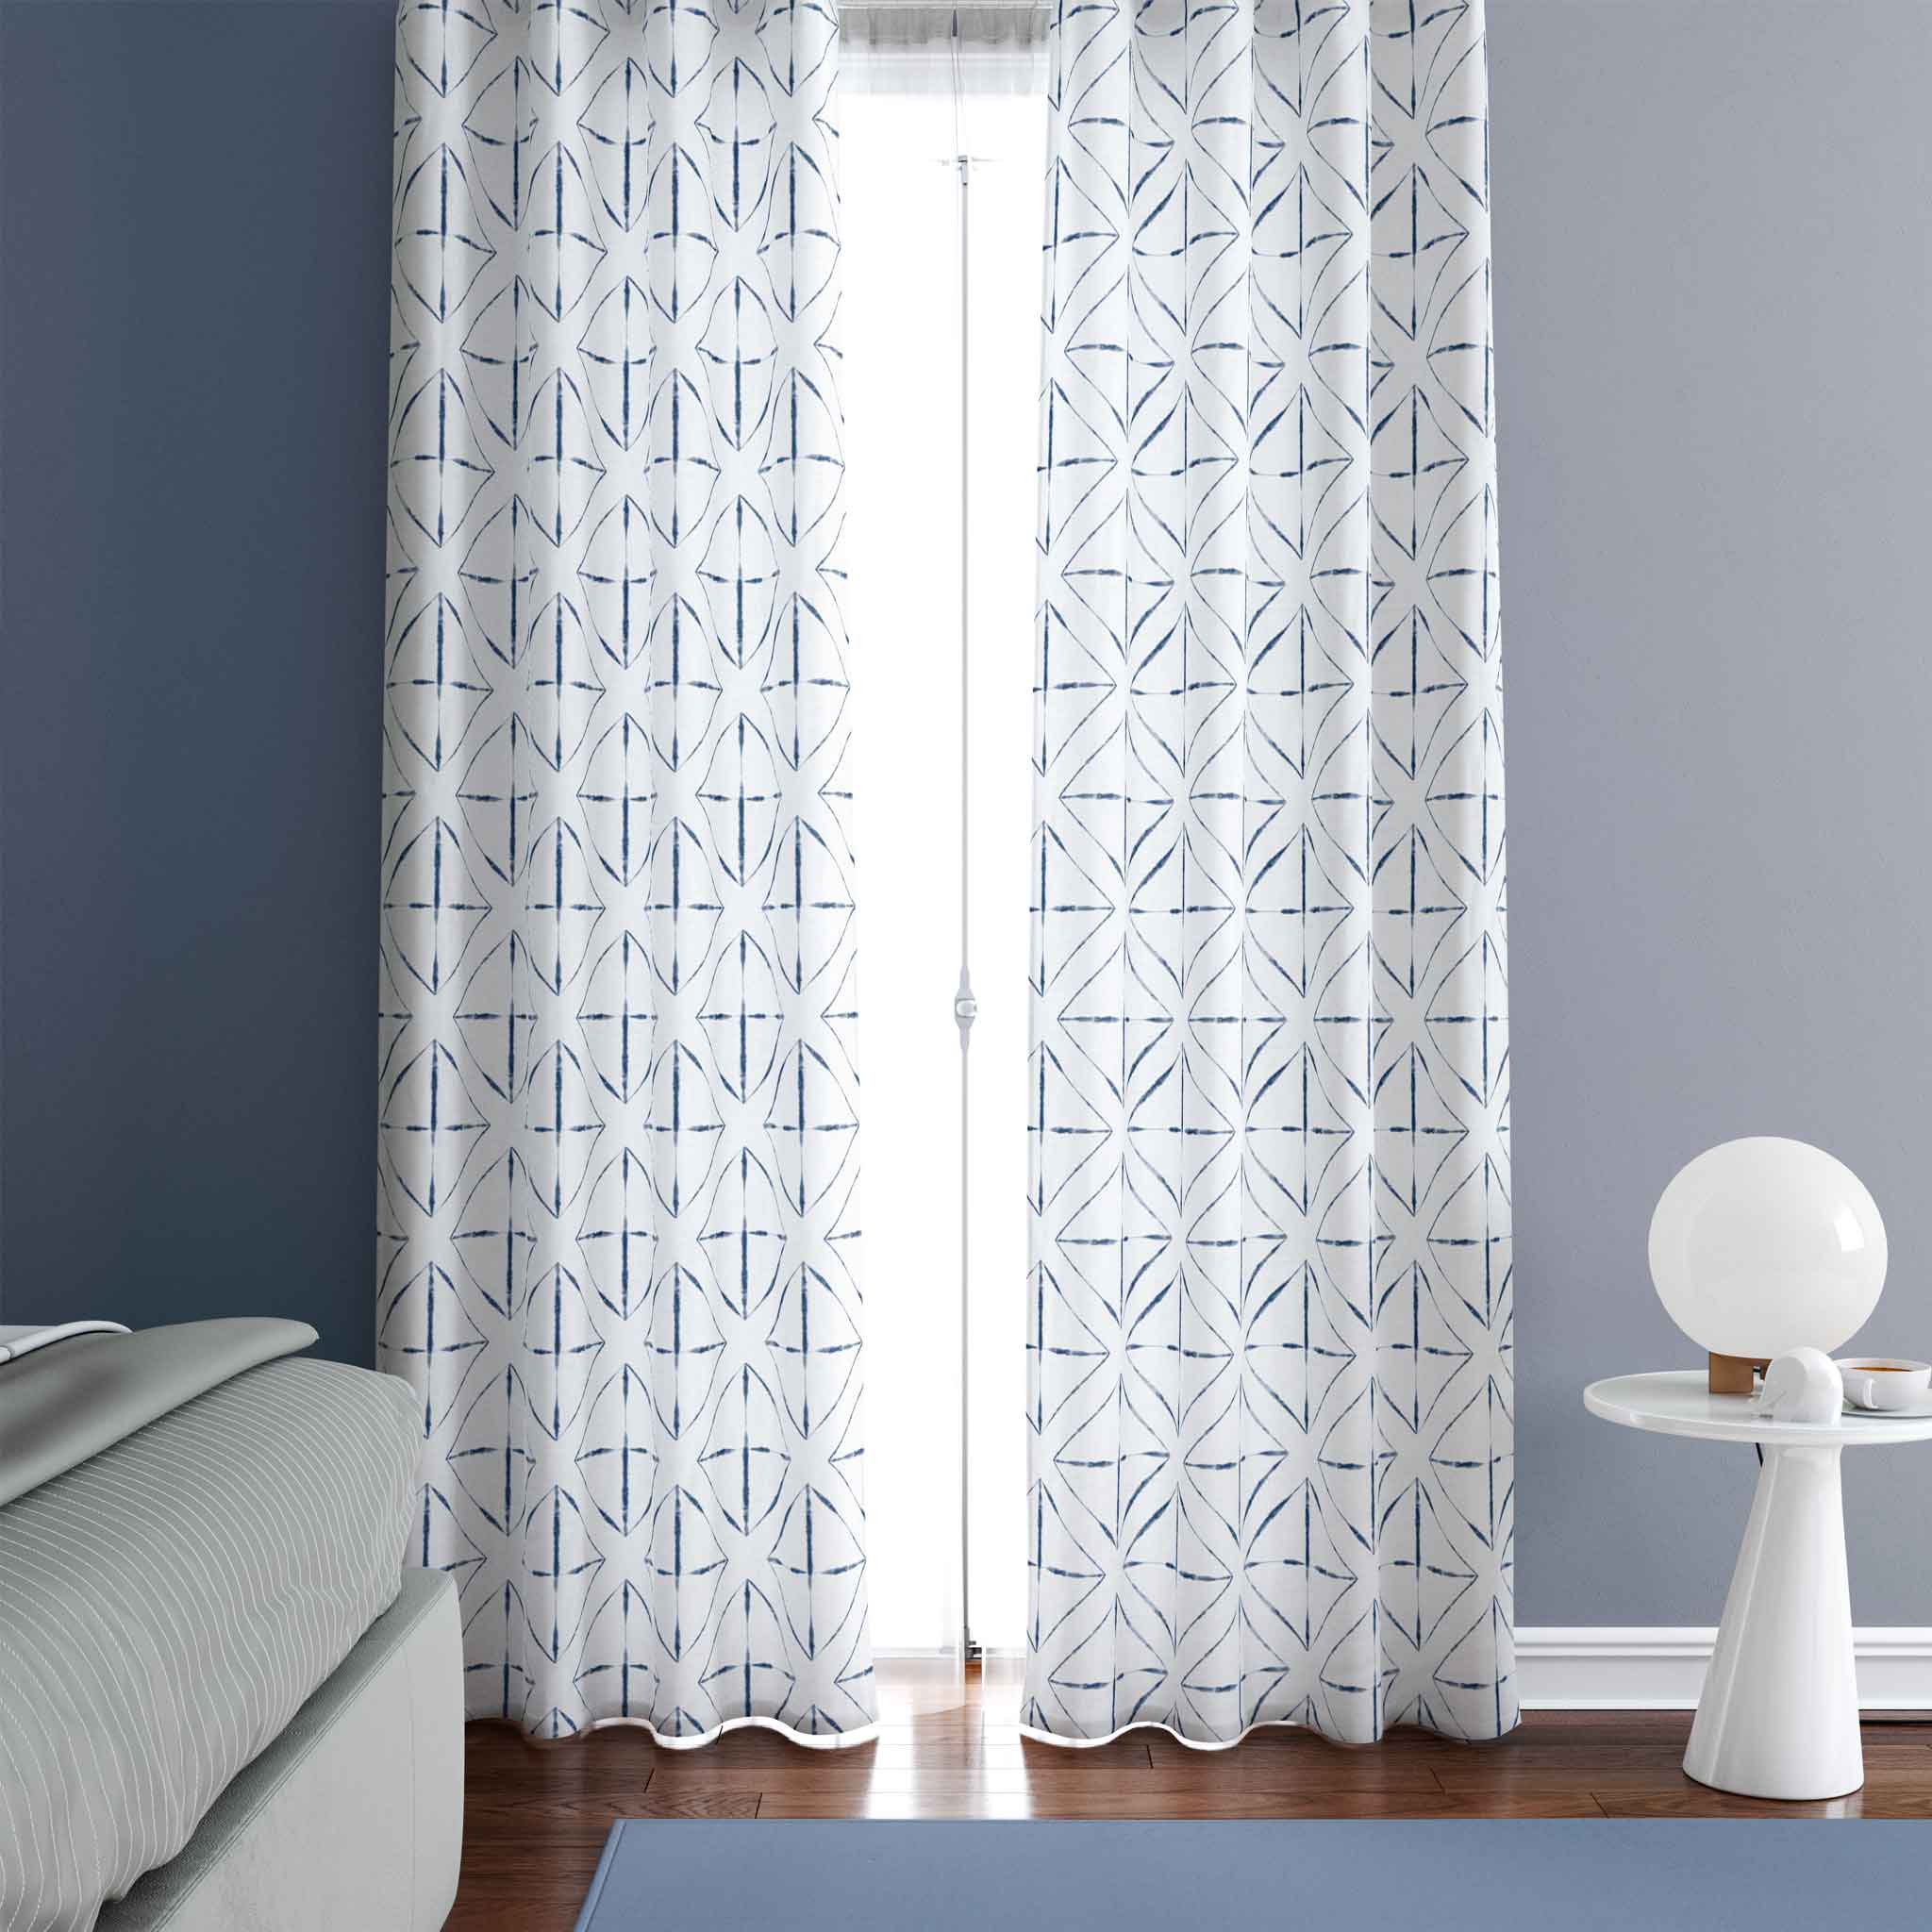 50 inch wide tie dye patterned curtains extra large indigo diamond on white background. Order two to complete a window-scape.